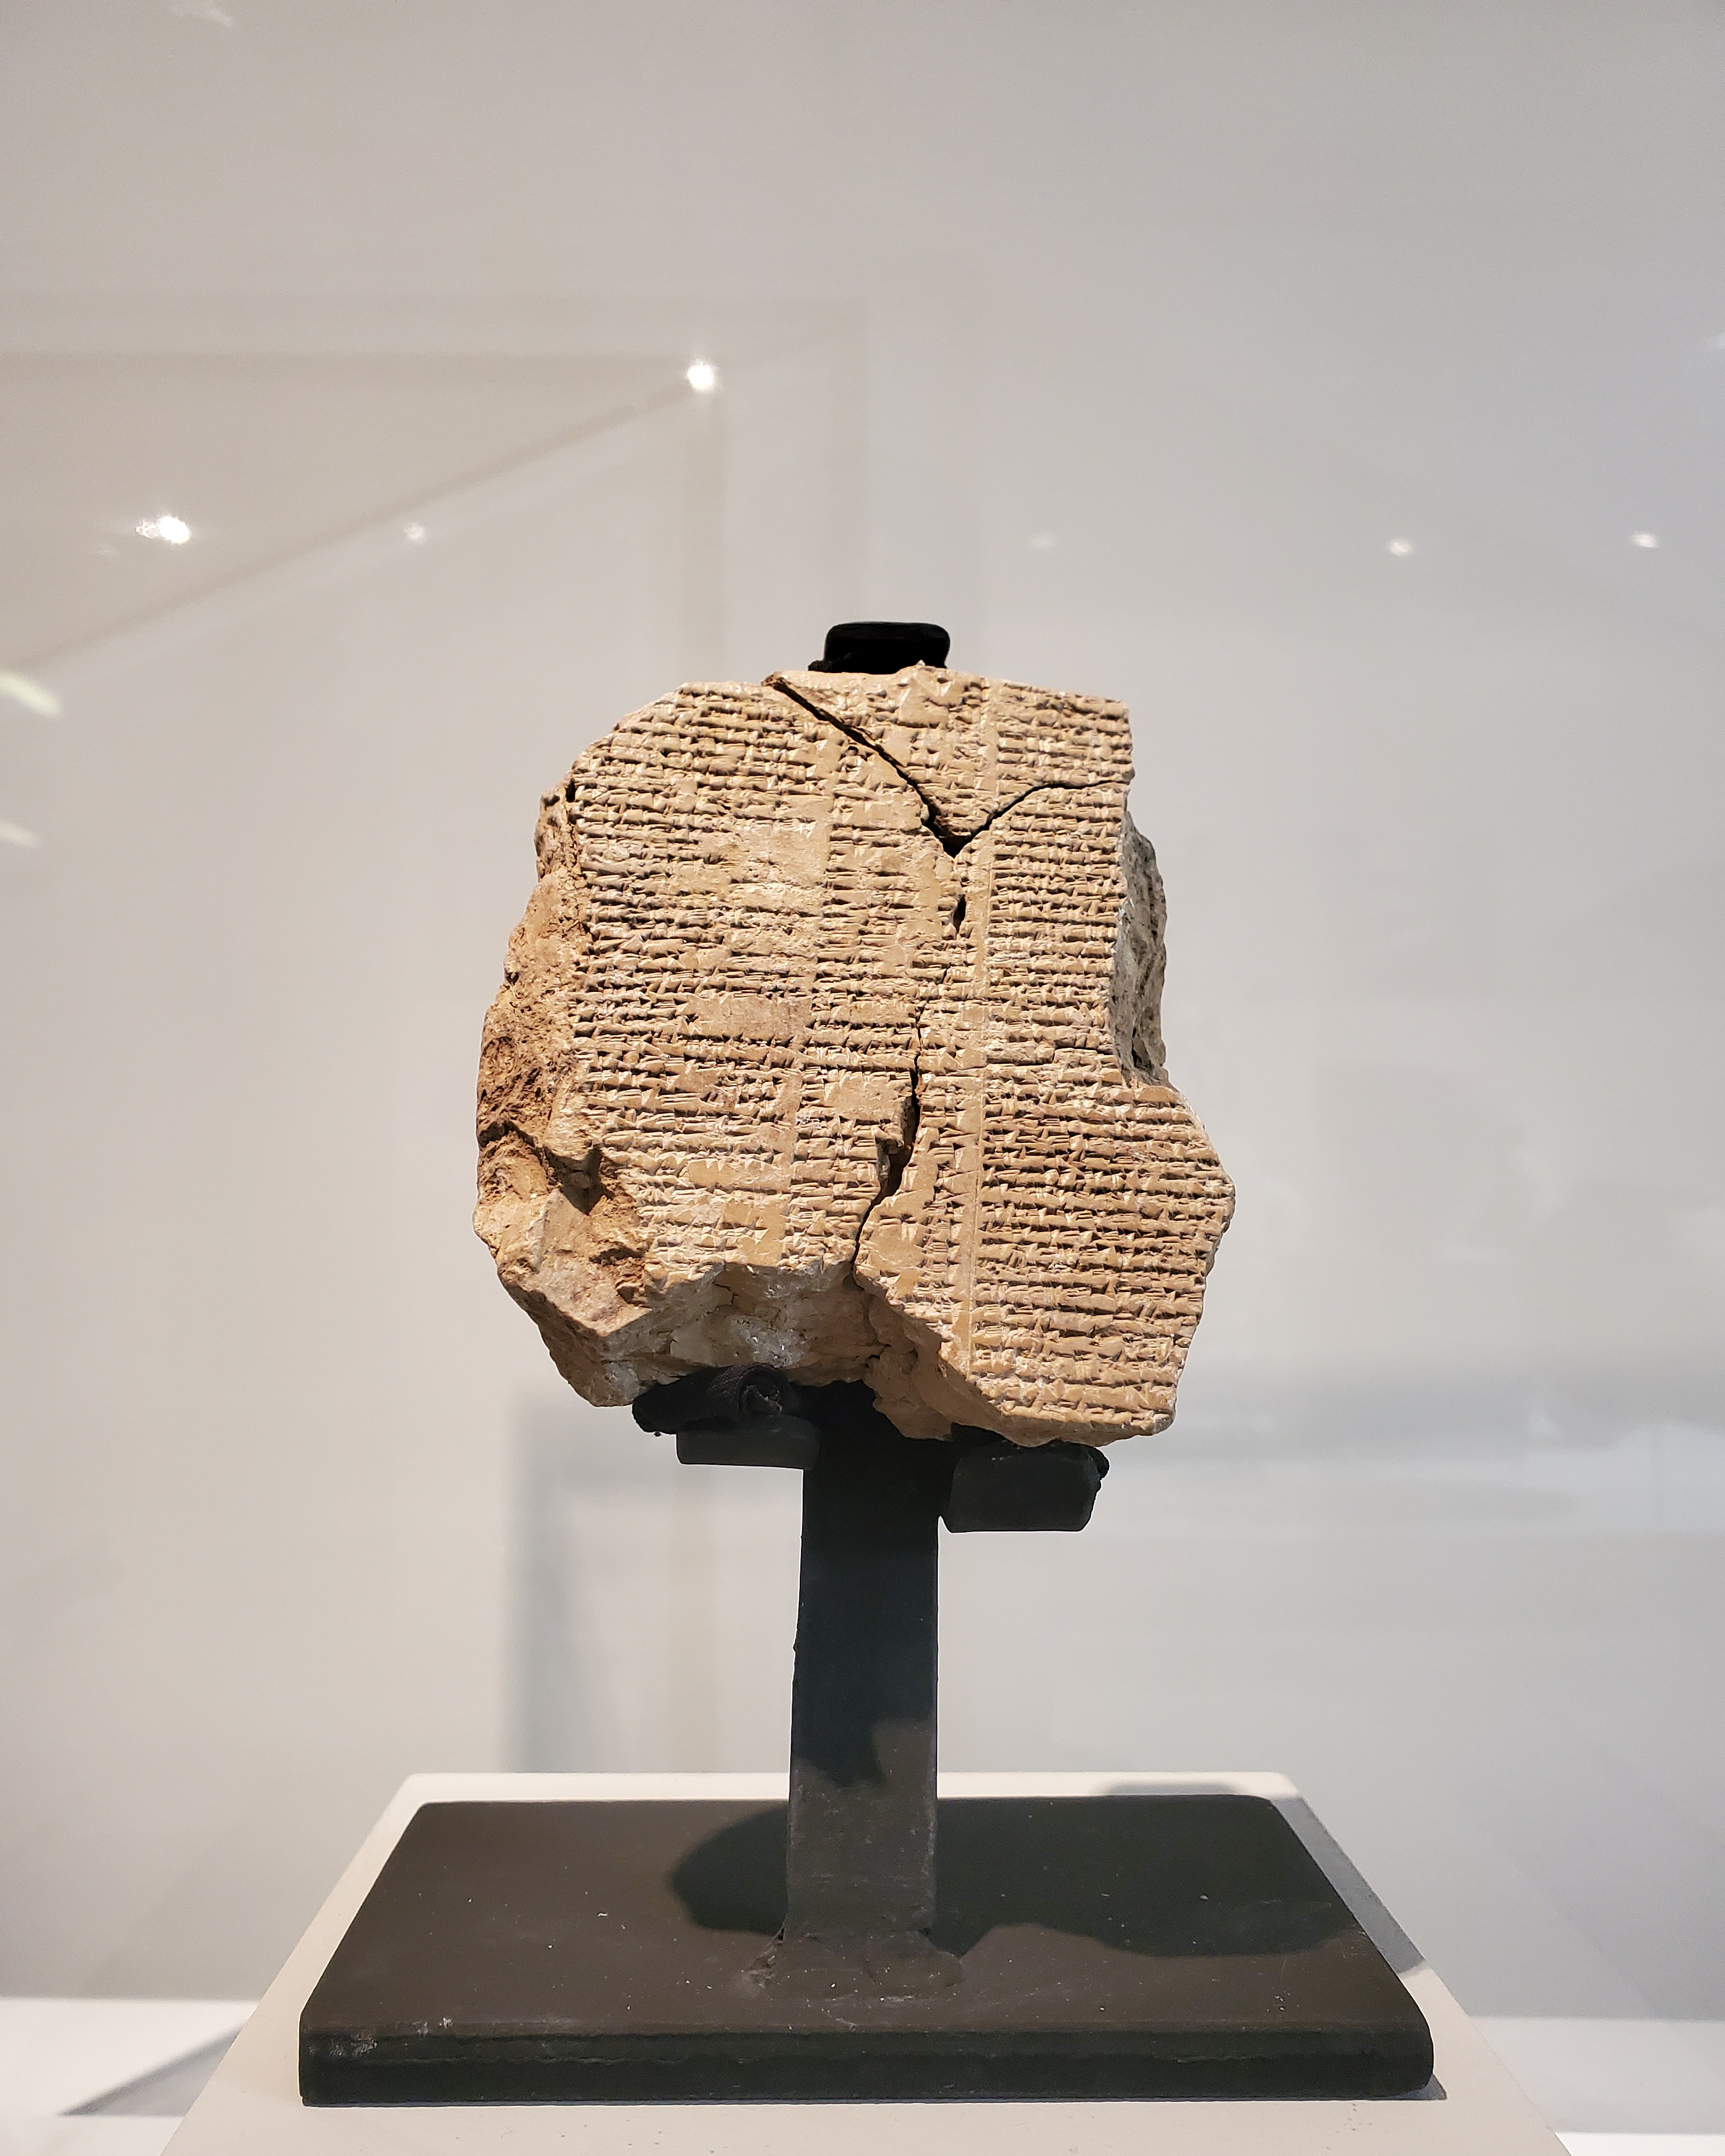 The Epic of Gilgamesh: Considered the oldest piece of literature known to humanity. This is an original tablet housed the in Slemani Museum in Iraq and is over 4,000 years old.